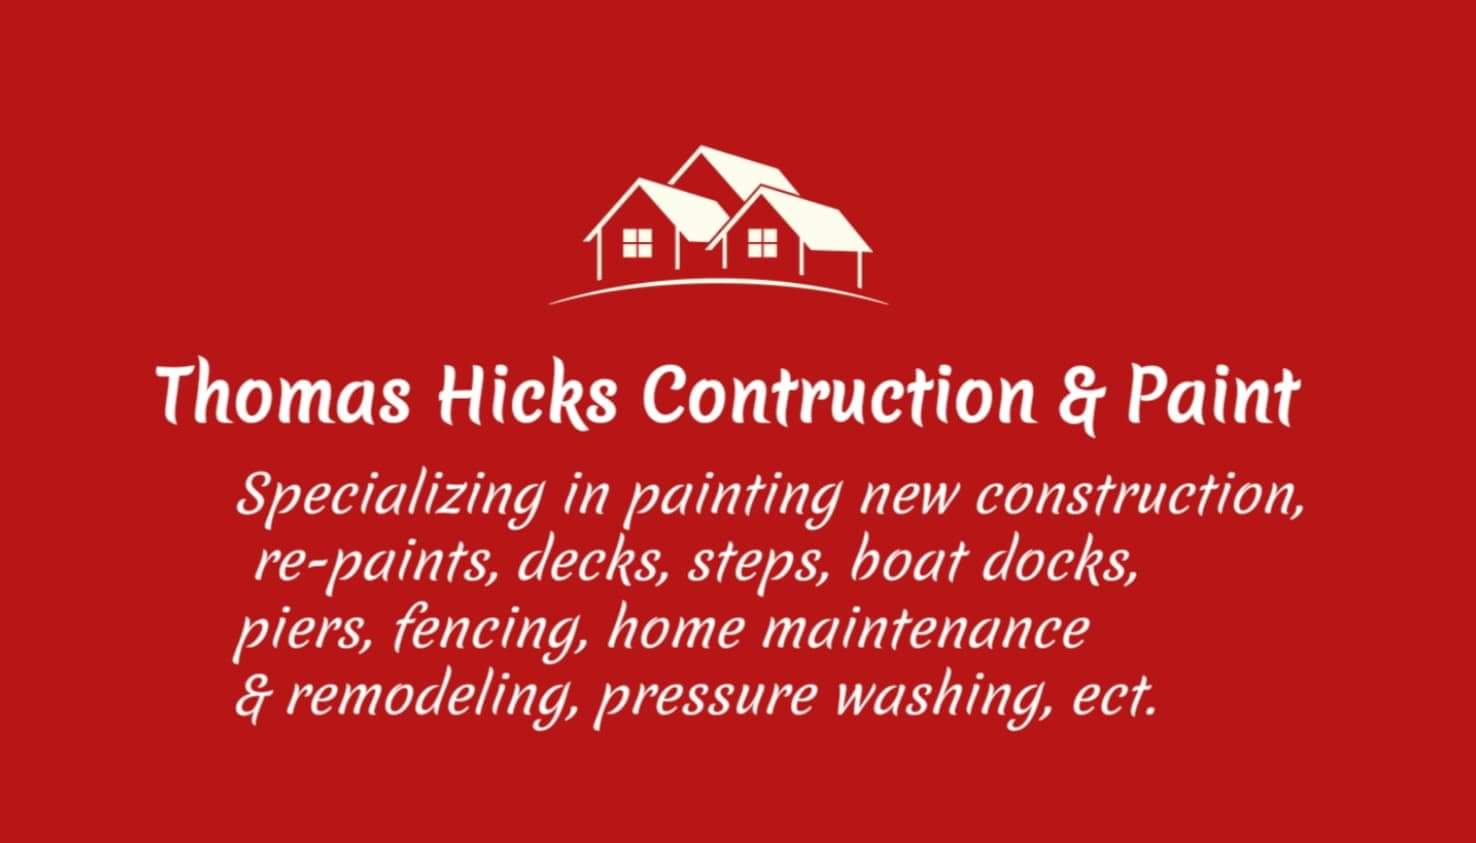 Thomas Hicks Construction and Painting